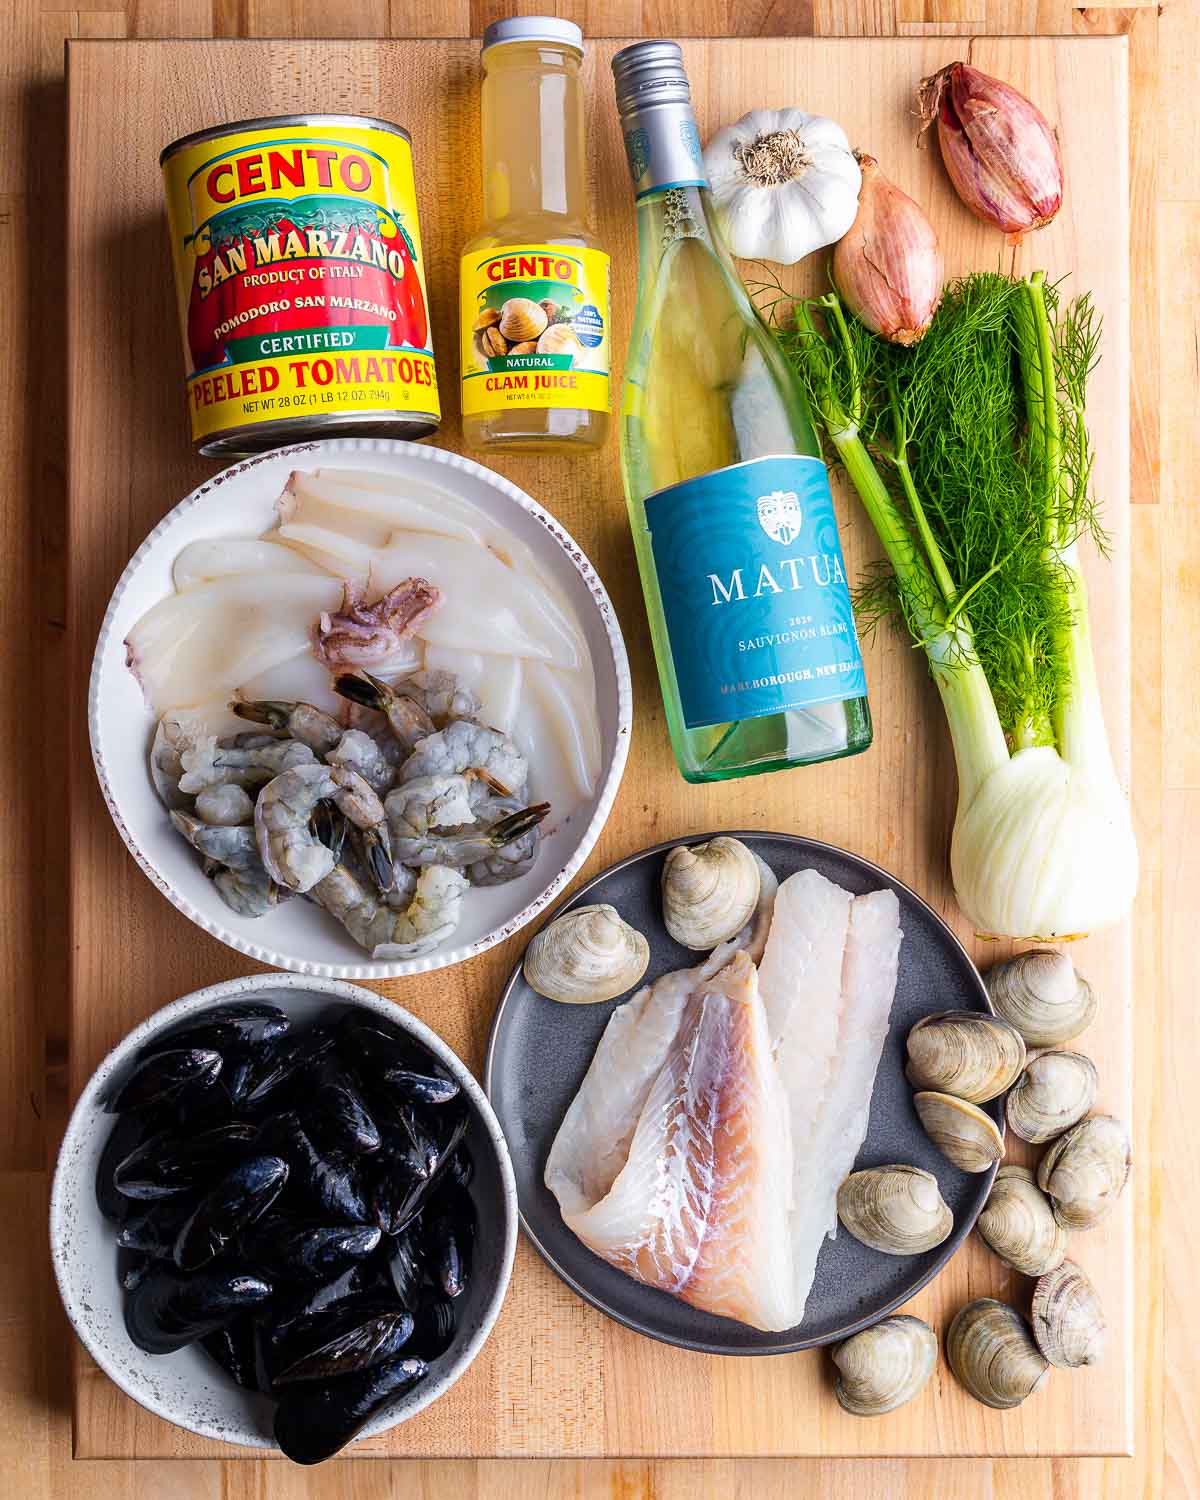 Ingredients shown: canned plum tomatoes, clam juice, wine, garlic, shallots, fennel, mussels, shrimp, calamari, fish, and clams.